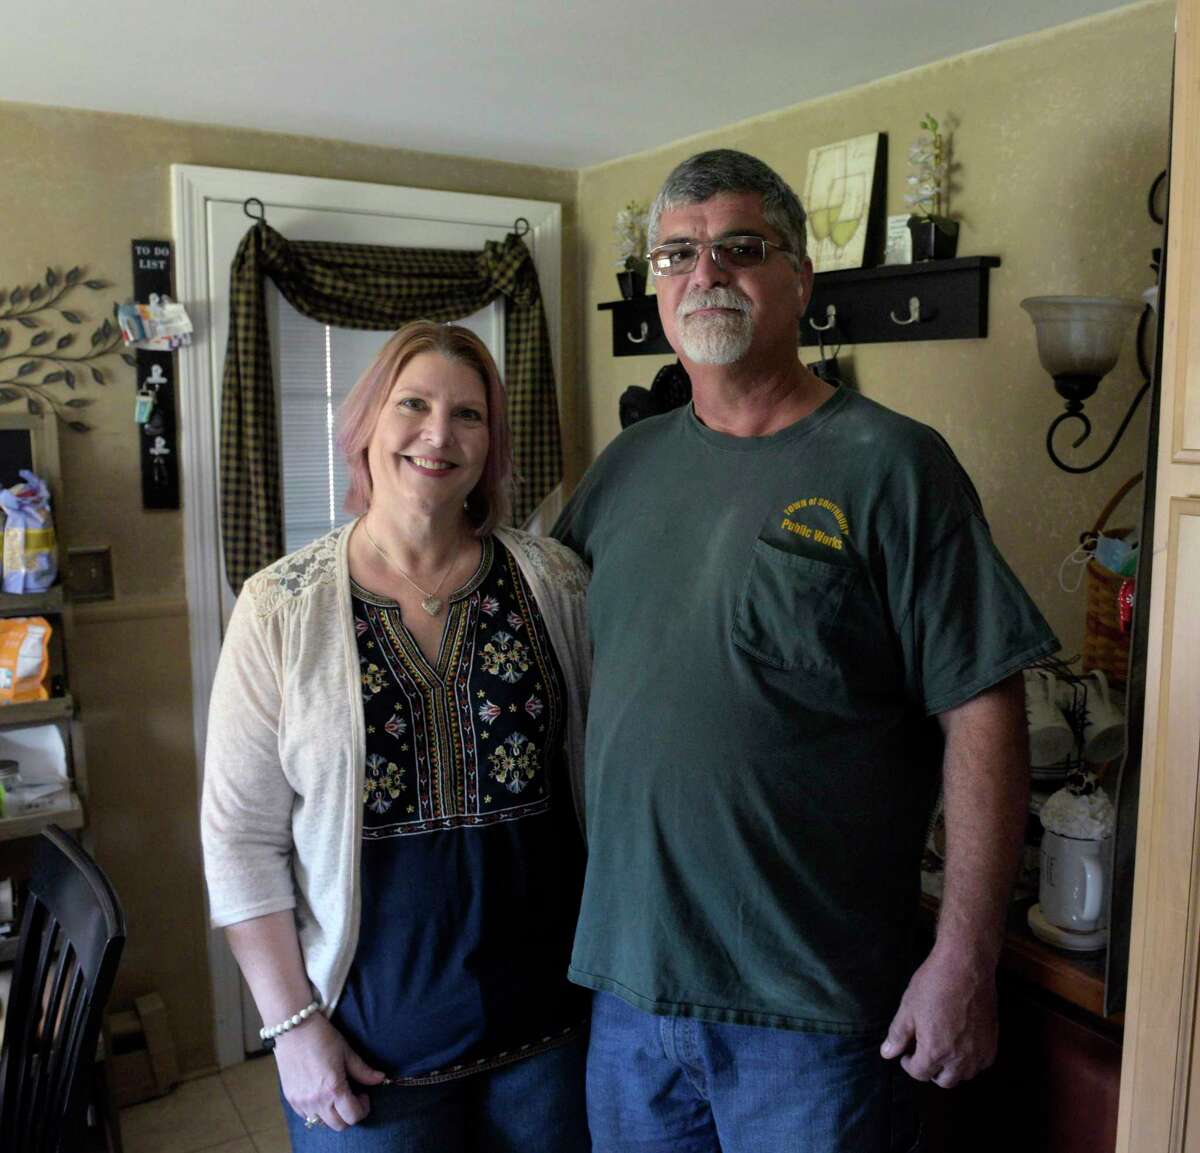 Gerard Magel, with his wife Shelly, is hearing impaired since birth and has sued the town of Southbury, his former foreman, and the former director, of the Southbury Public Works Department, over an alleged American with Disabilities Act compliance issue. Thursday, October 21, 2021, Oakville, Conn.